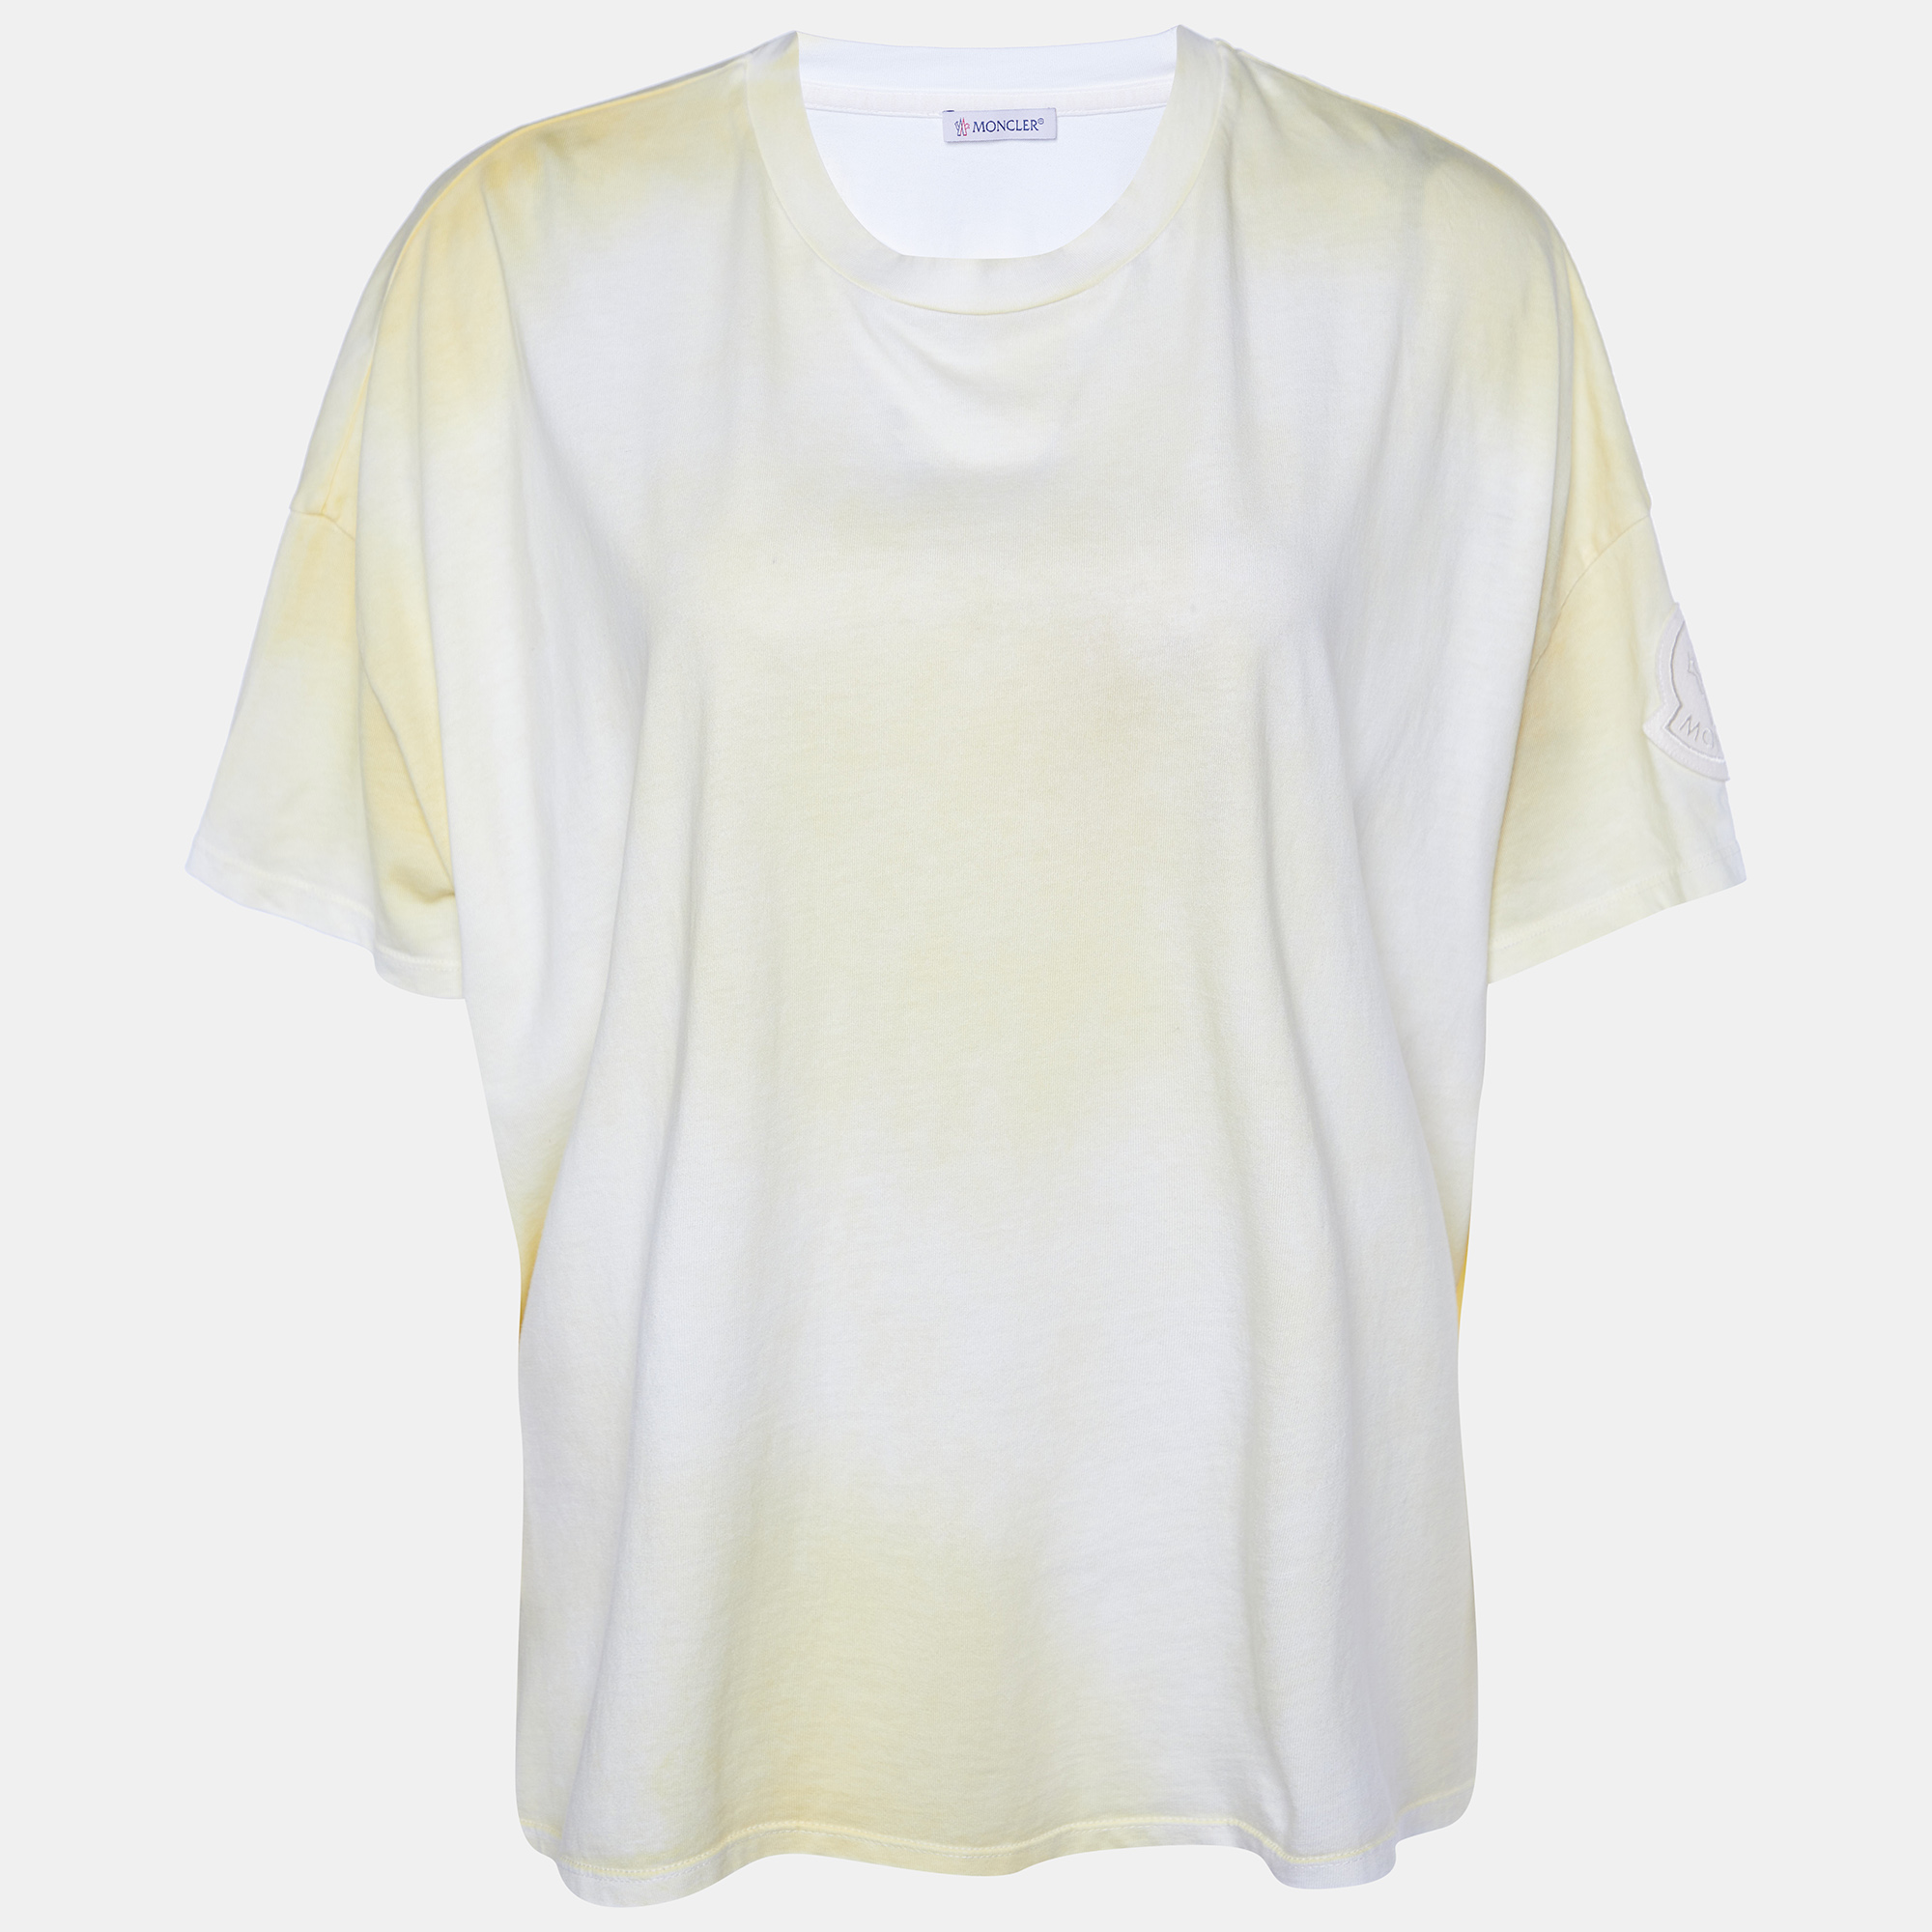 Perfect for casual outings or errands this Moncler T shirt is the best piece to feel comfortable and stylish in. It flaunts a catchy shade and a relaxed fit.